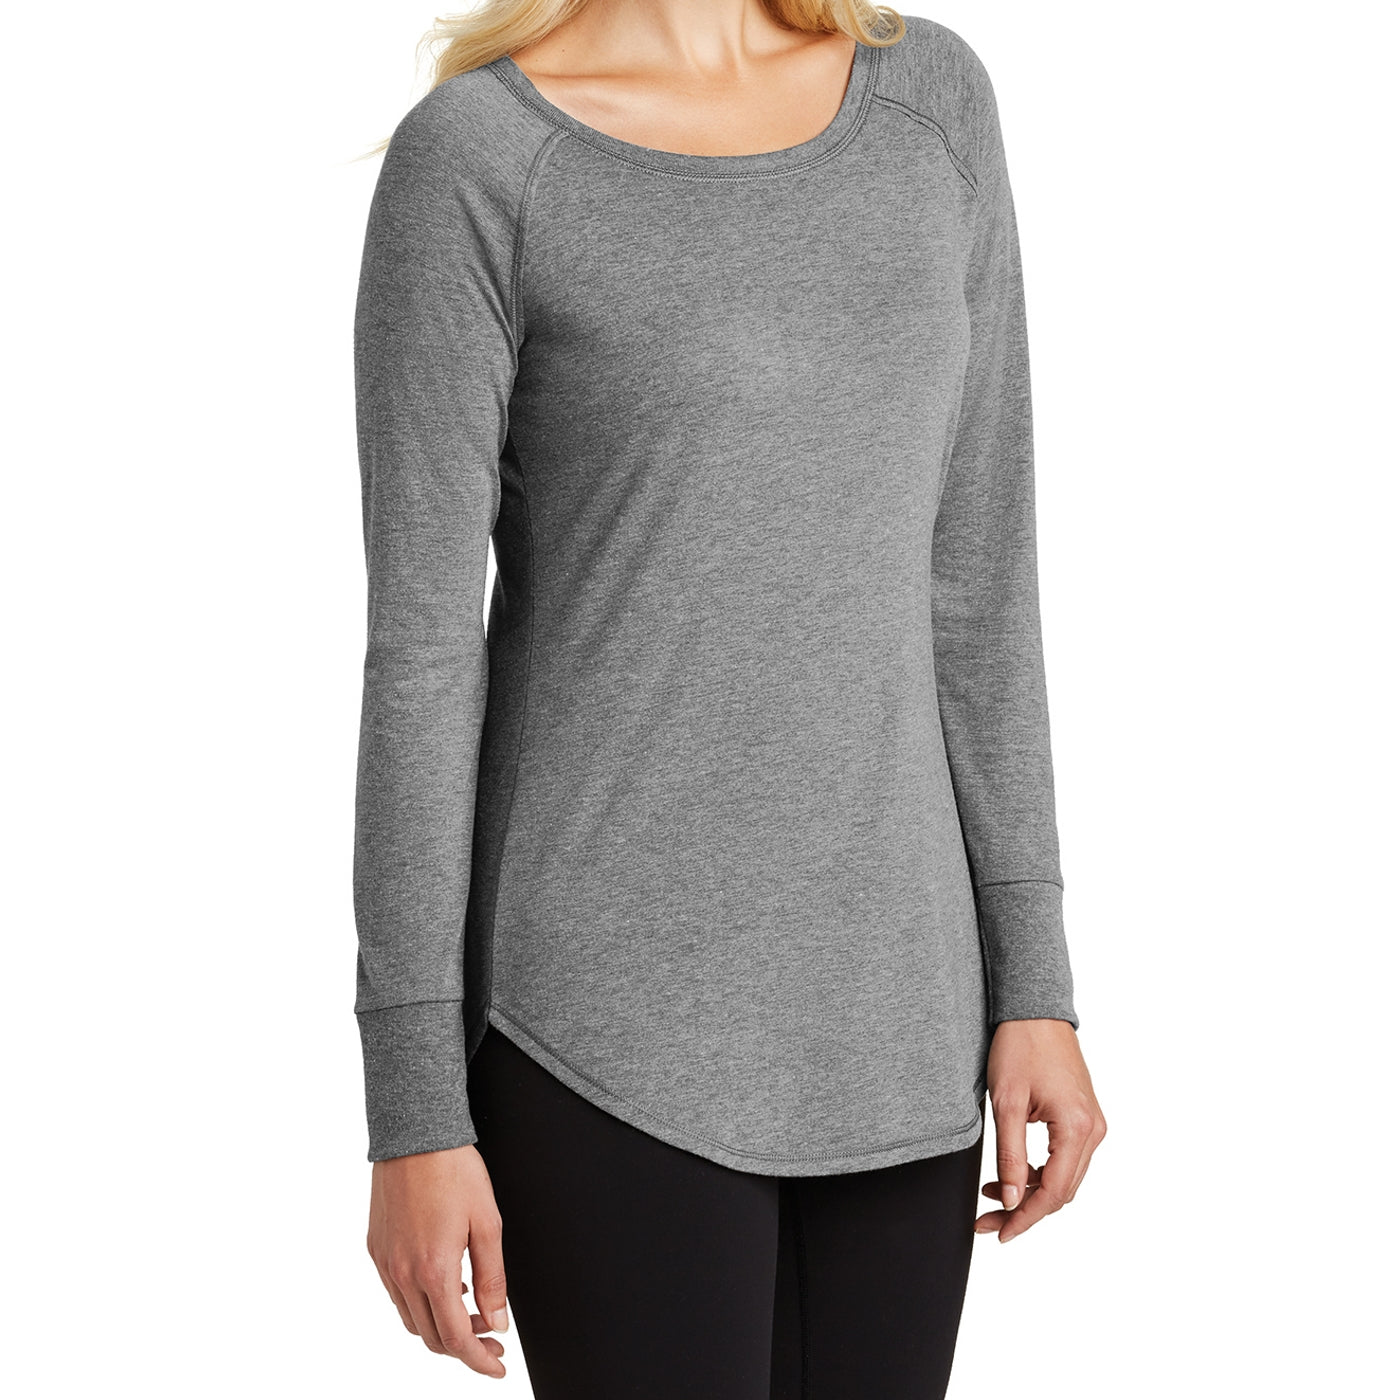 Women's Perfect Tri Long Sleeve Tunic - Grey Frost